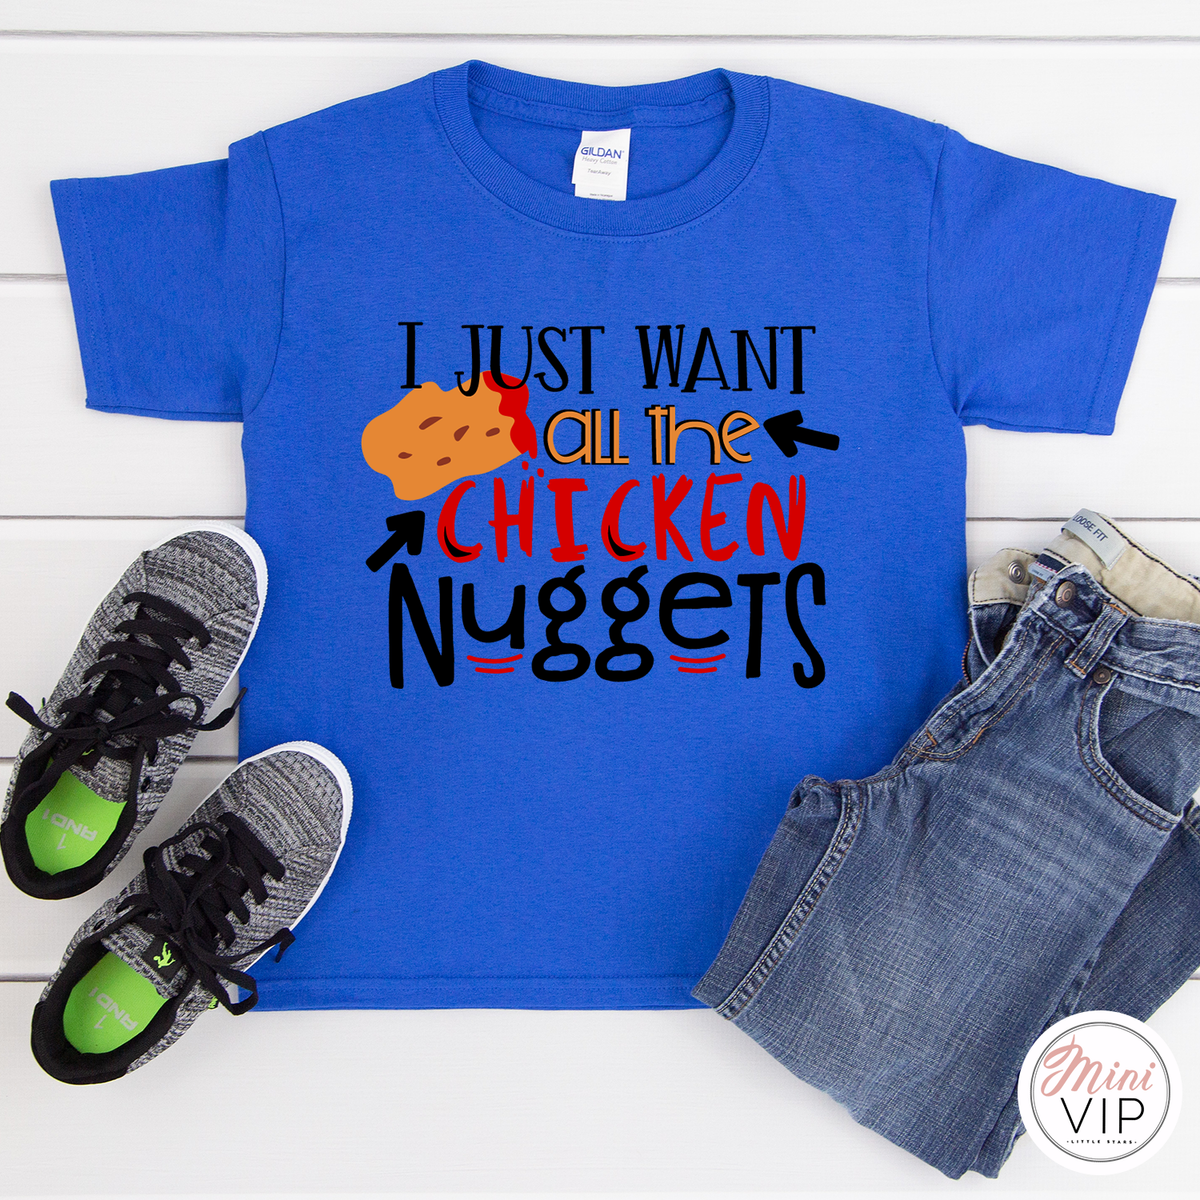 I Just Want All The Chicken Nuggets Funny Royal Blue t-shirt